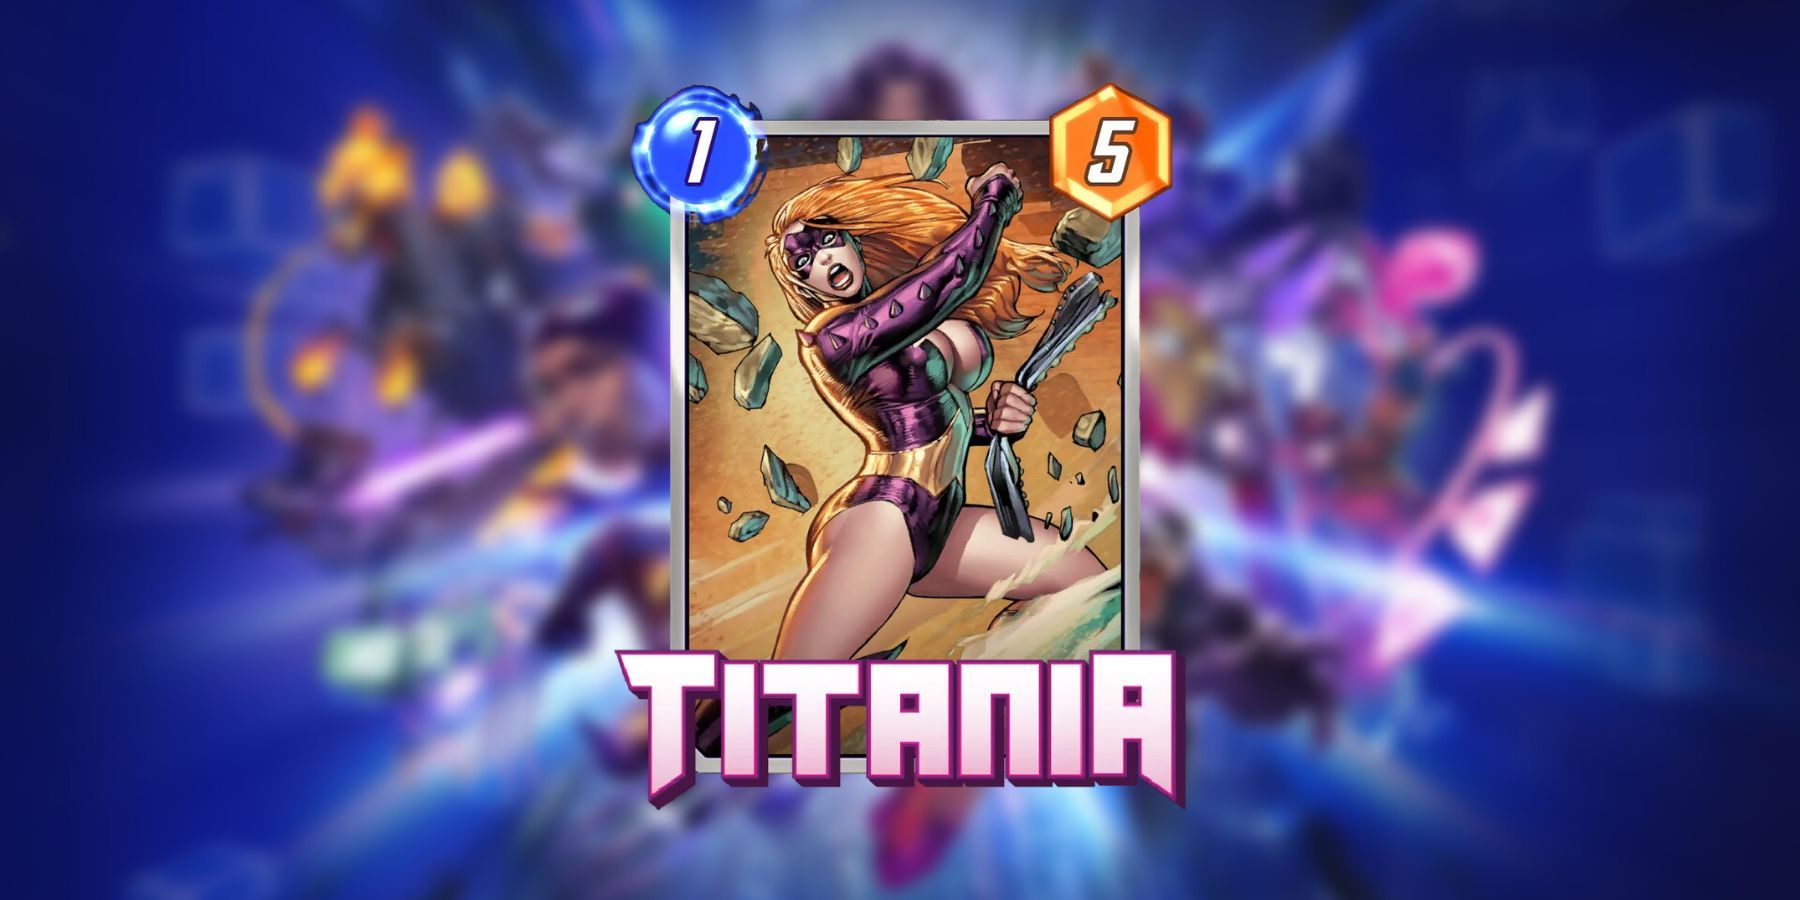 image showing the titania card in marvel snap.